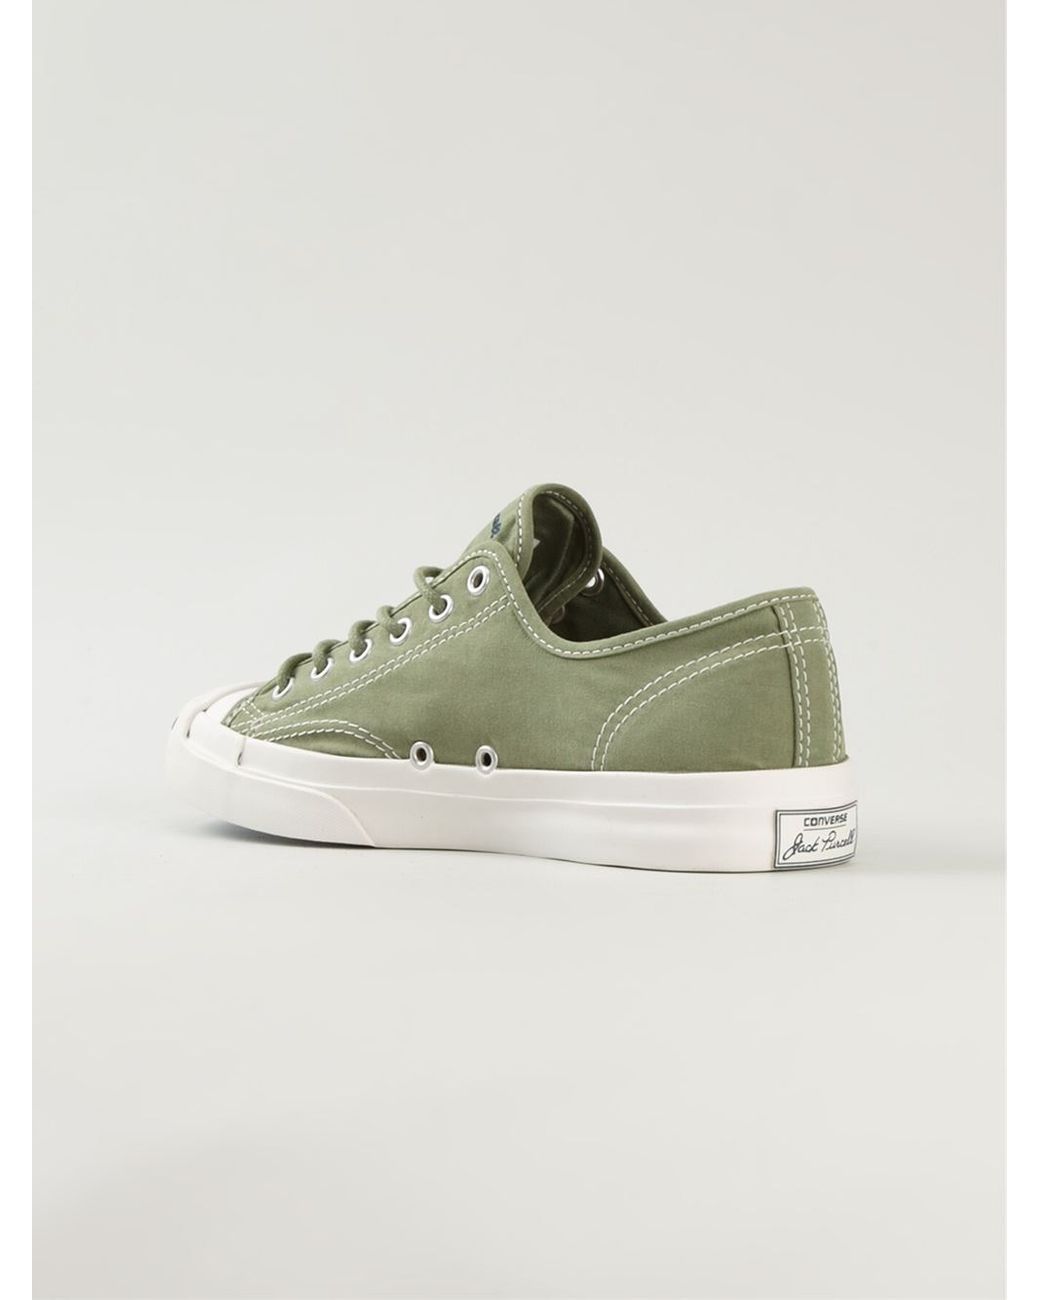 Converse 'Jack Purcell' Sneakers in Green for Men | Lyst